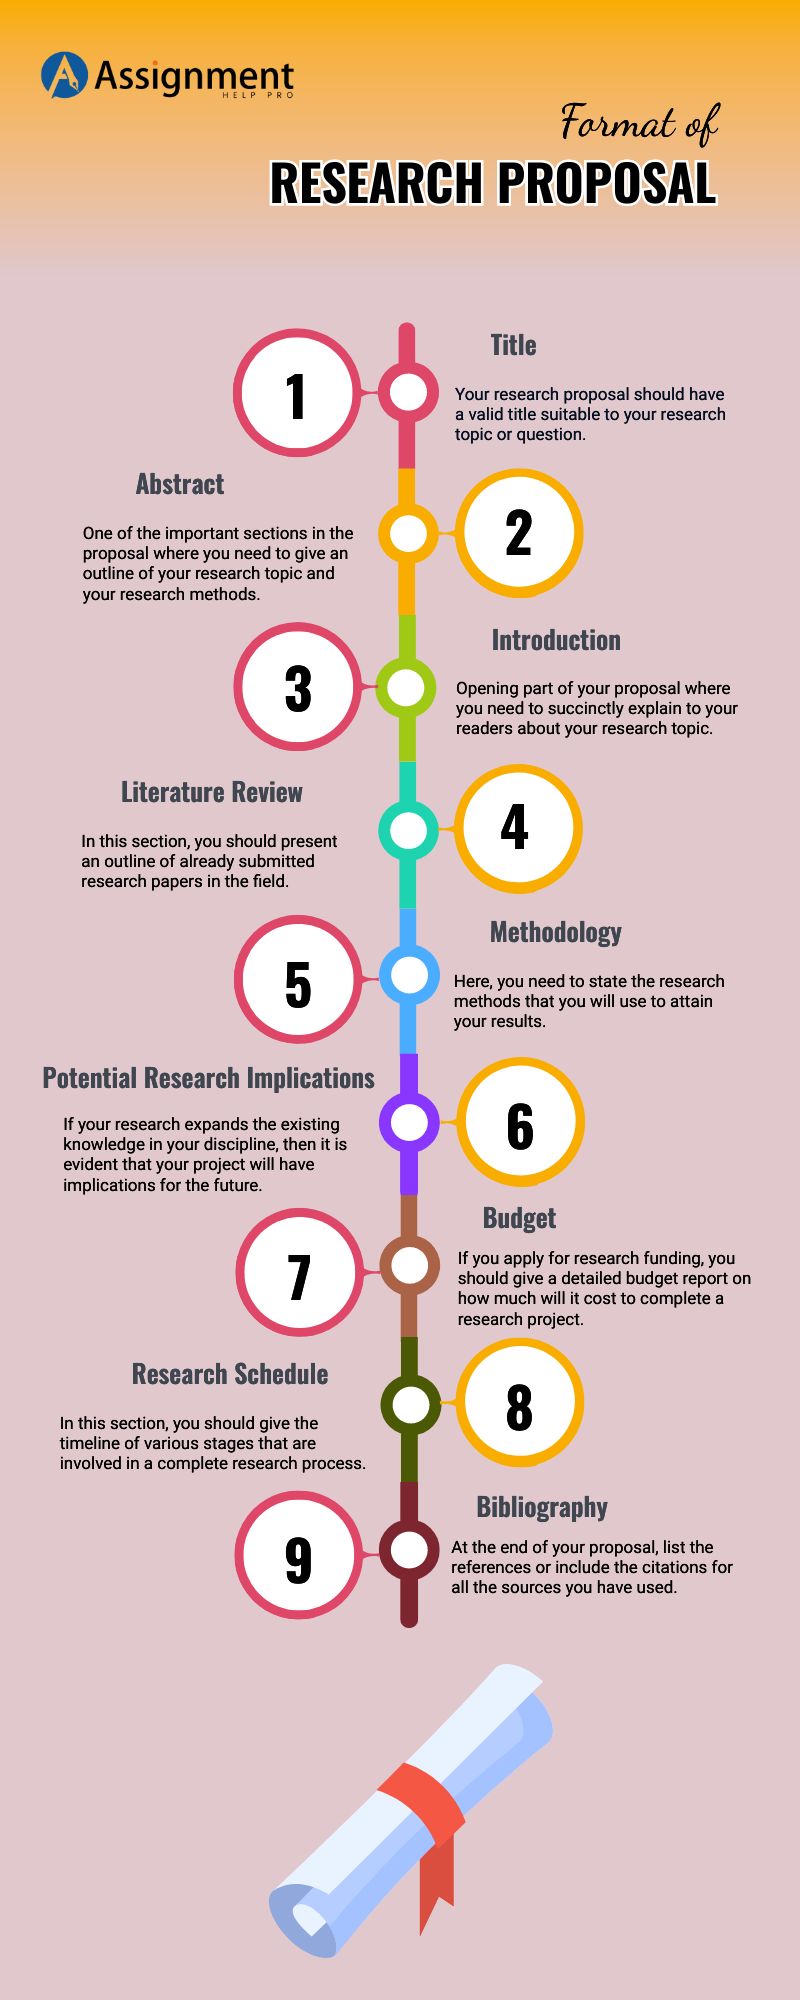 main sections of a research proposal